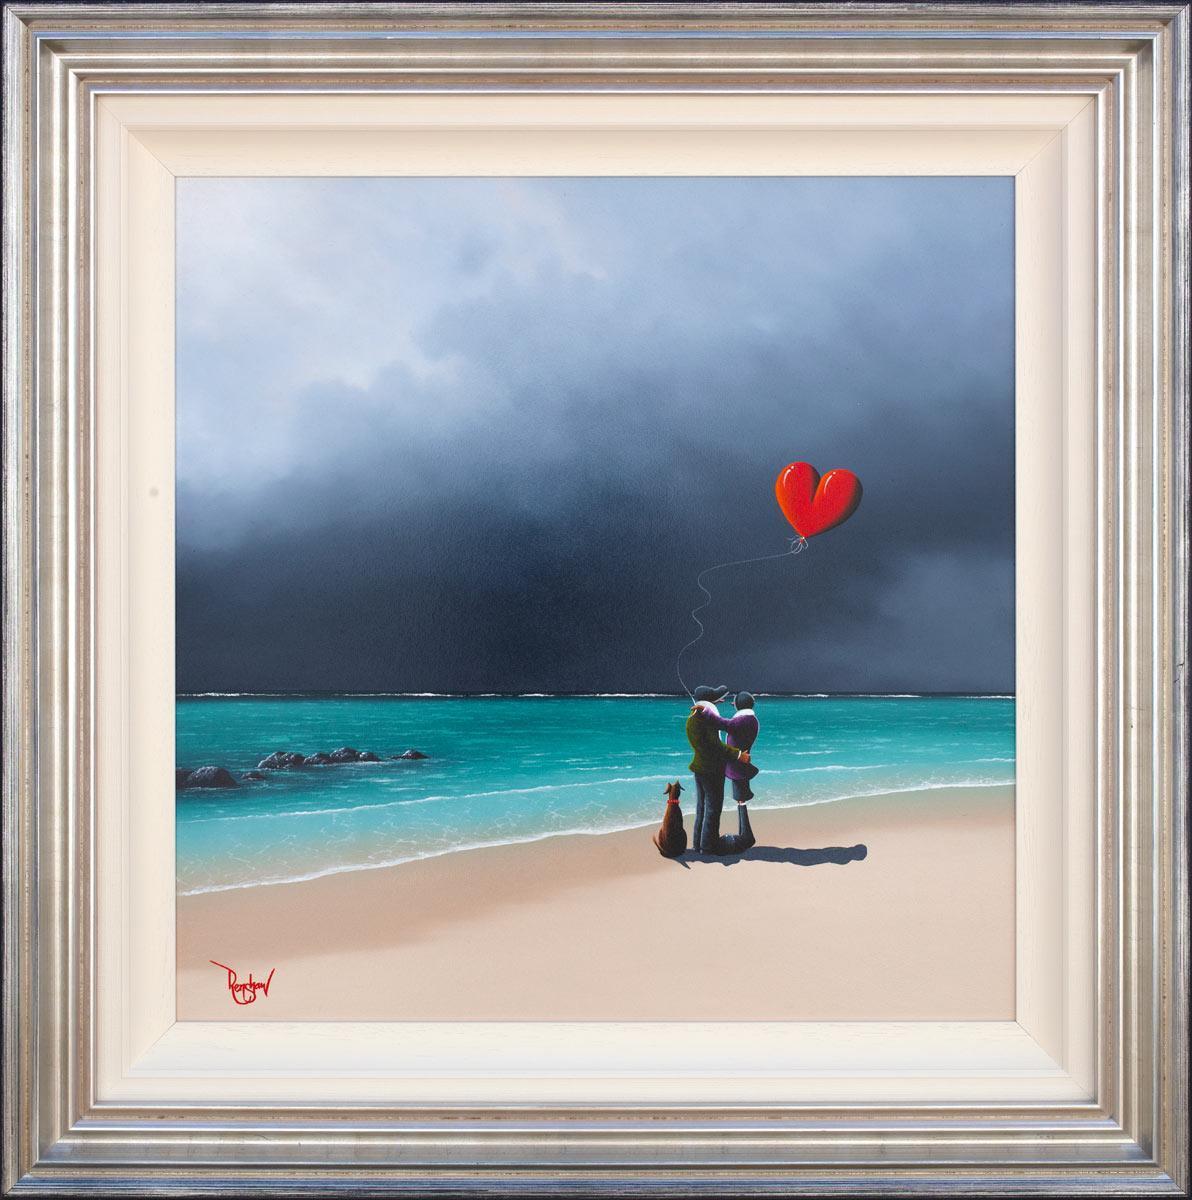 Another Time, Another Place - Original David Renshaw Framed